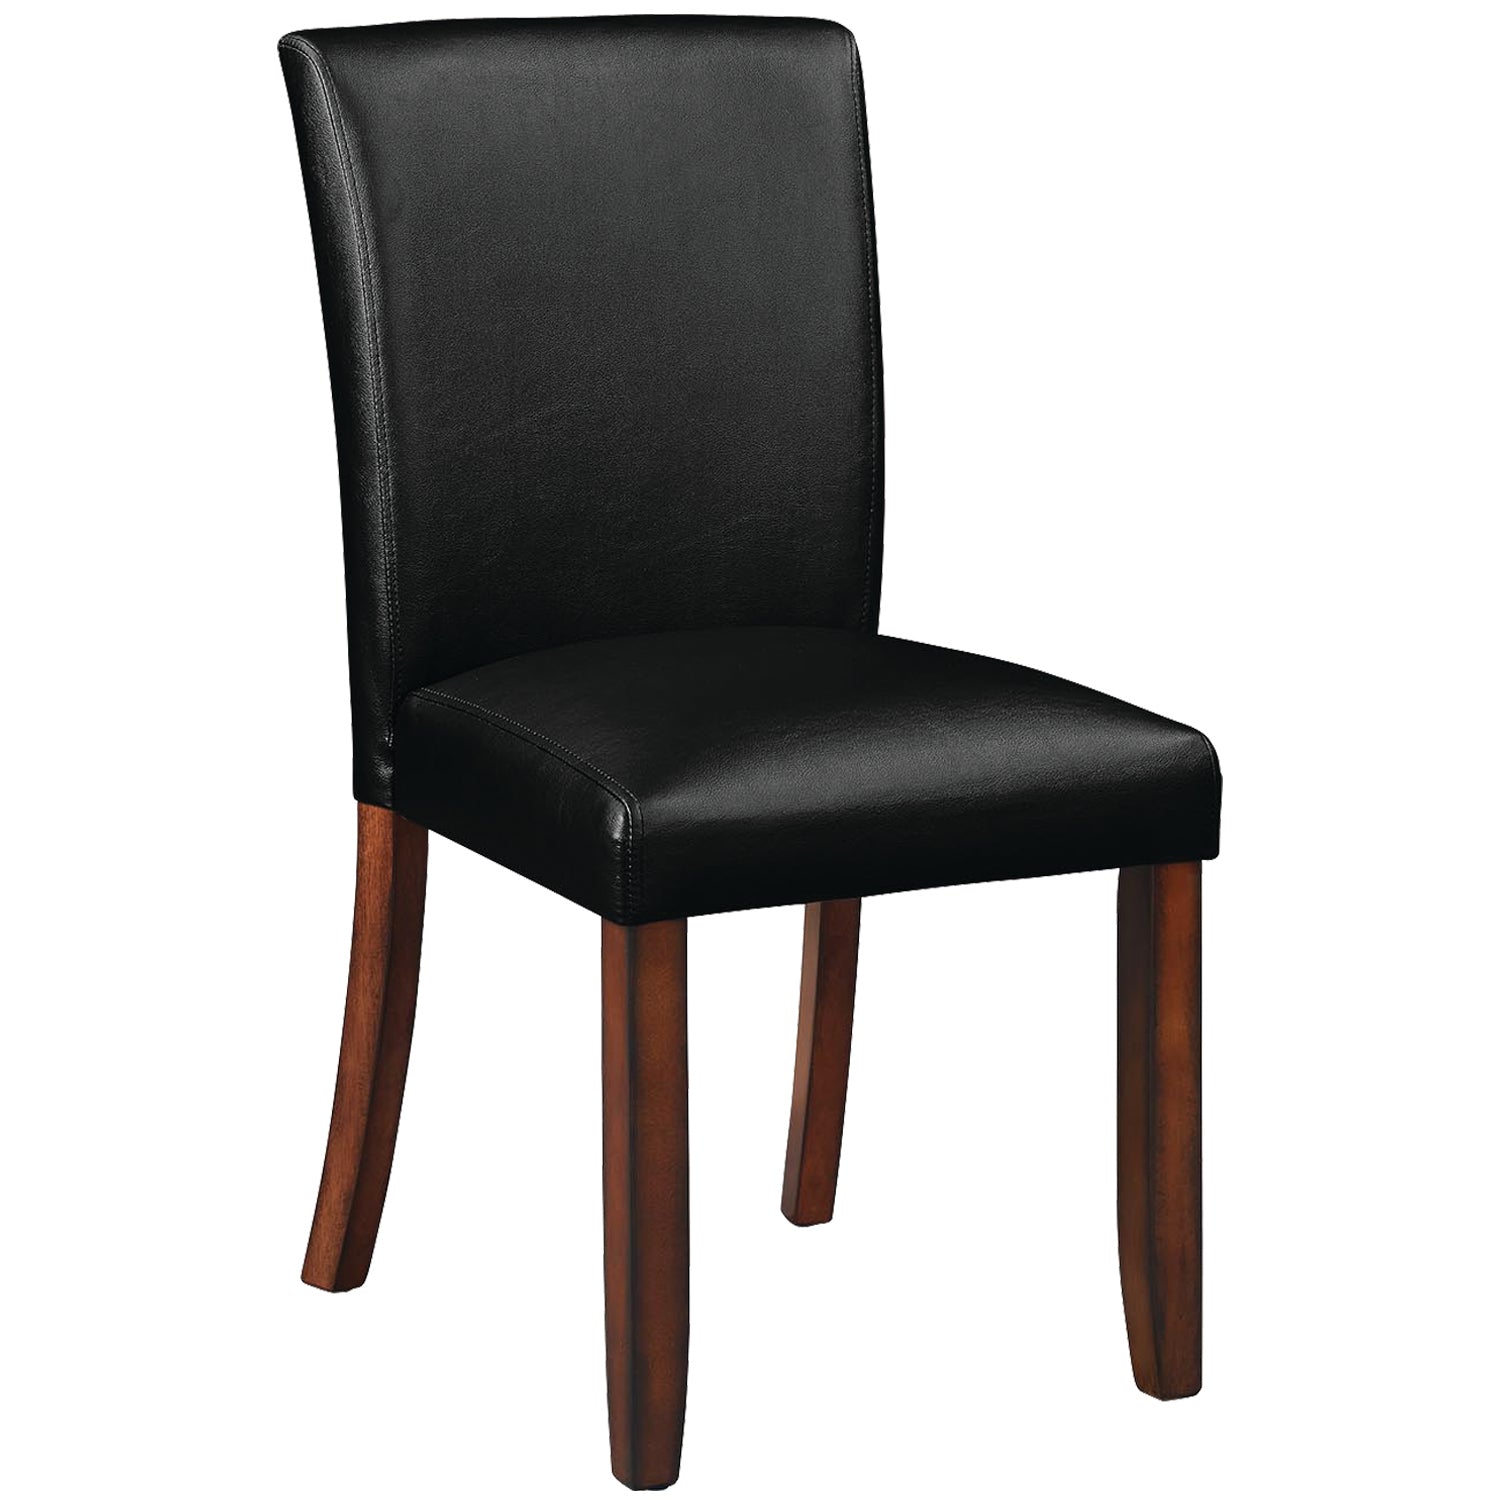 Padded vinyl dining chair in a chestnut finish.